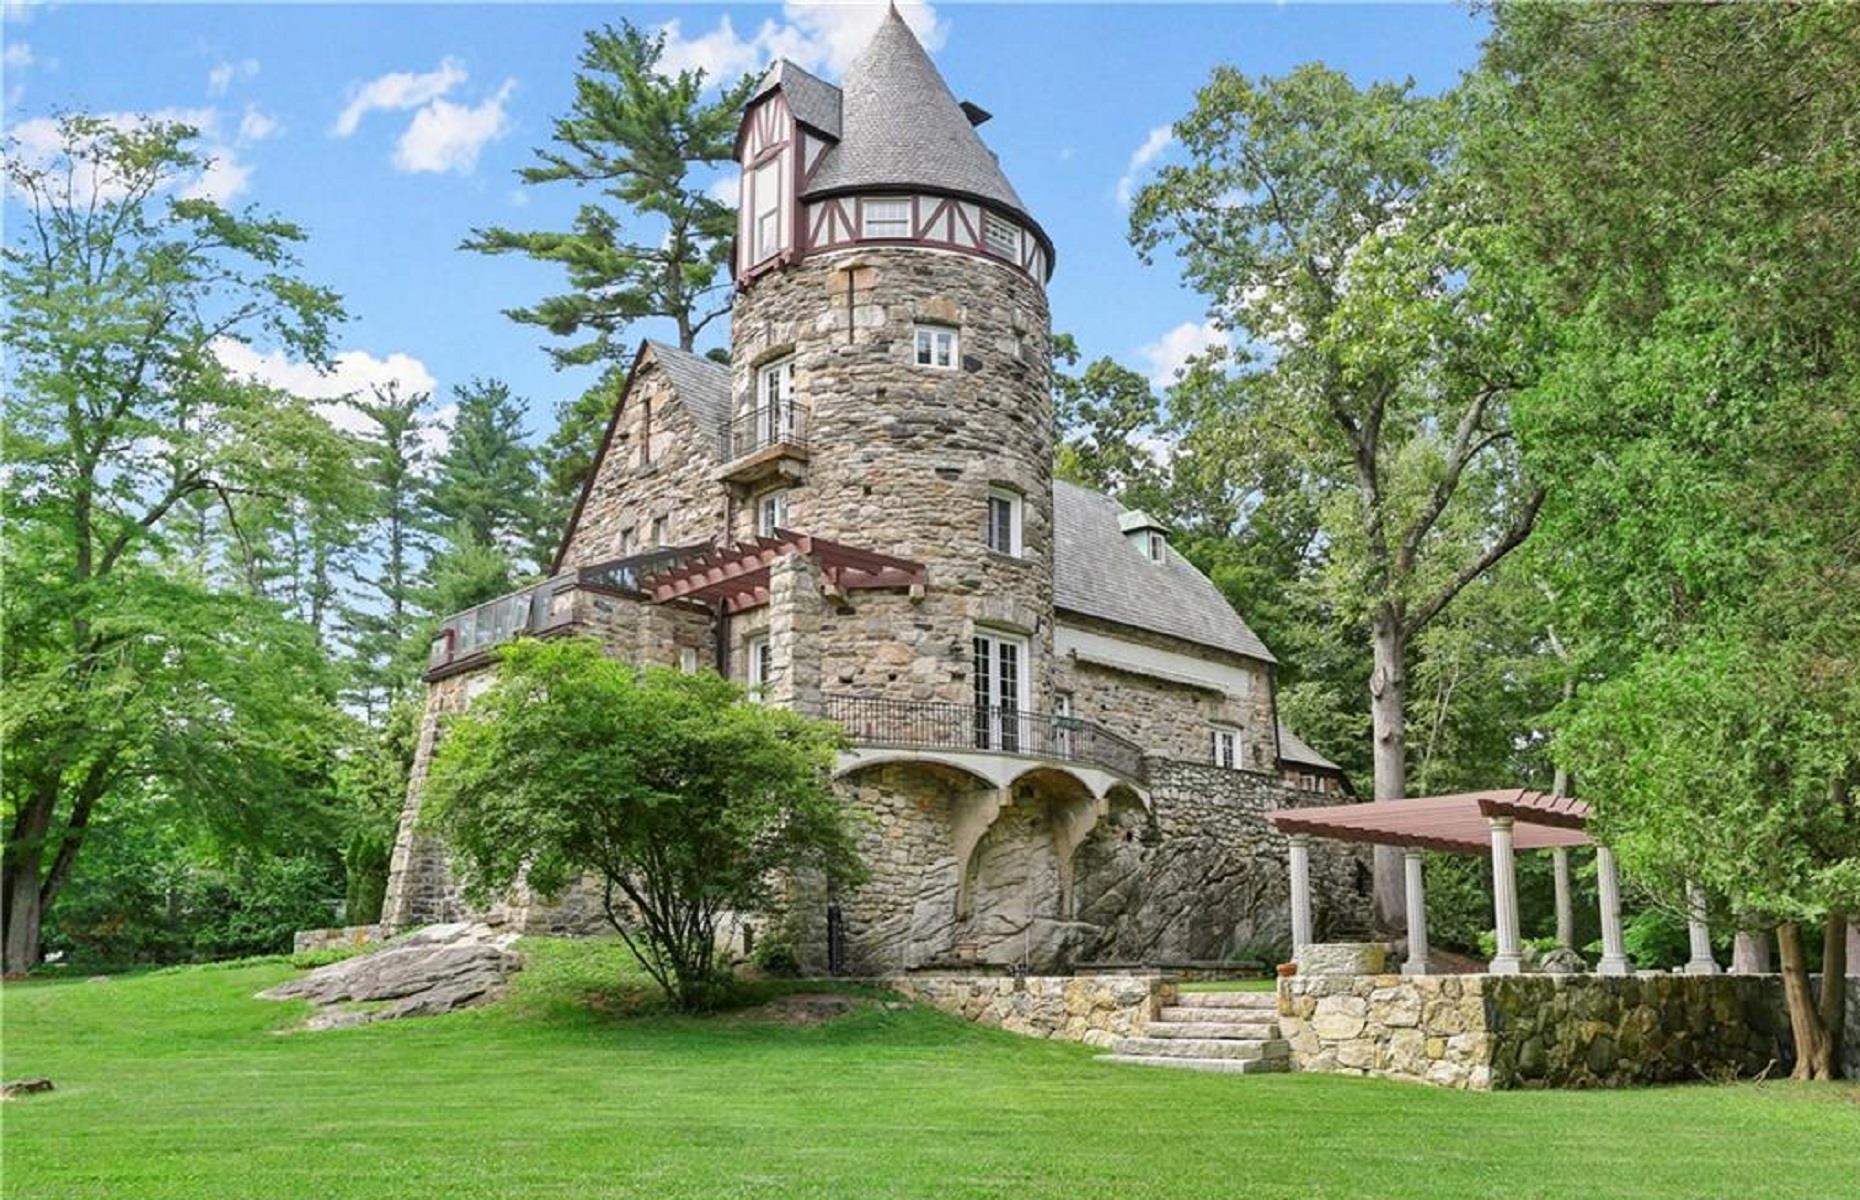 Amazing castles for sale in America | loveproperty.com